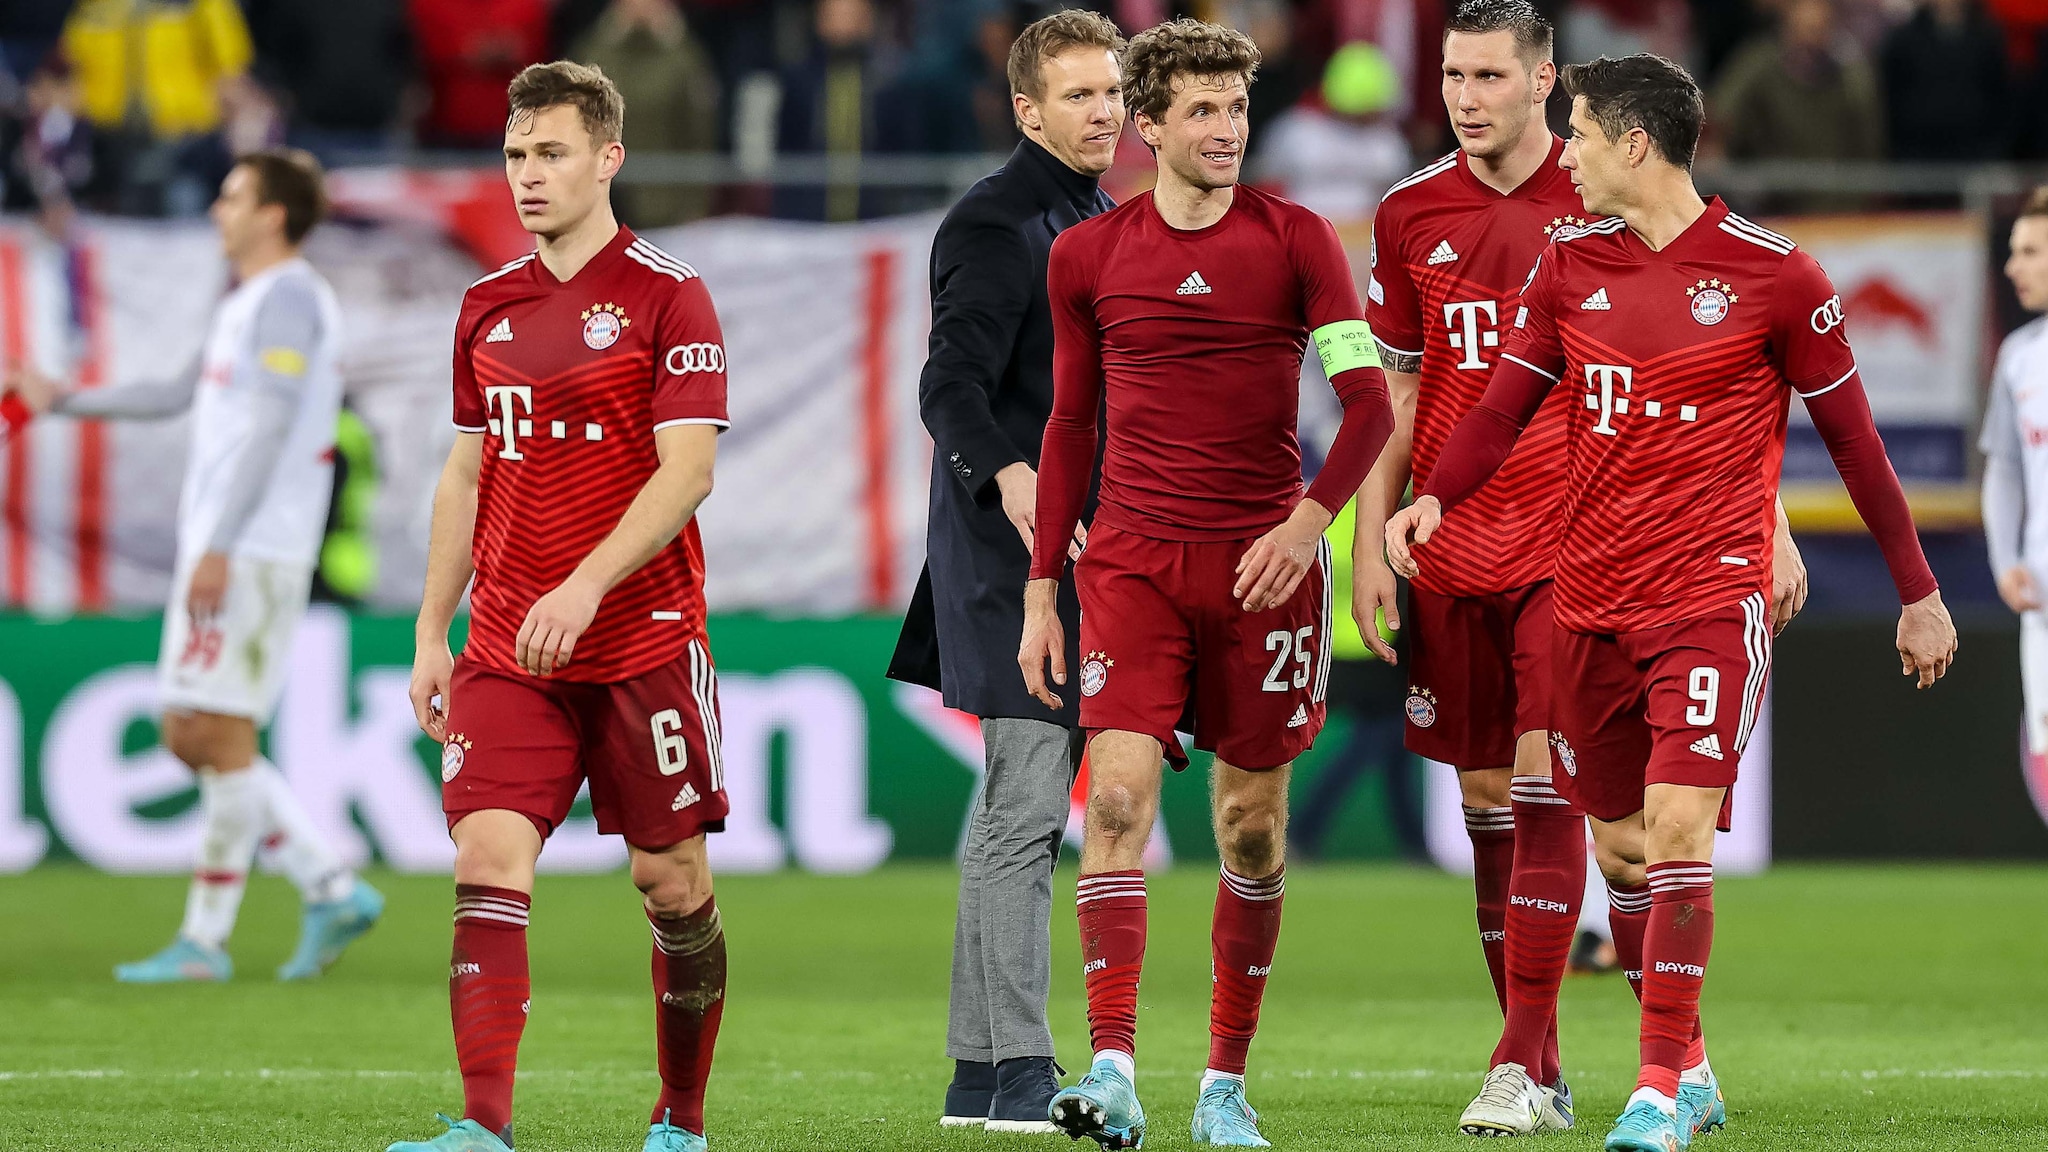 Bayern vs Salzburg Champions League round of 16 preview: Where to watch,  predicted line-ups, squad changes | UEFA Champions League | UEFA.com